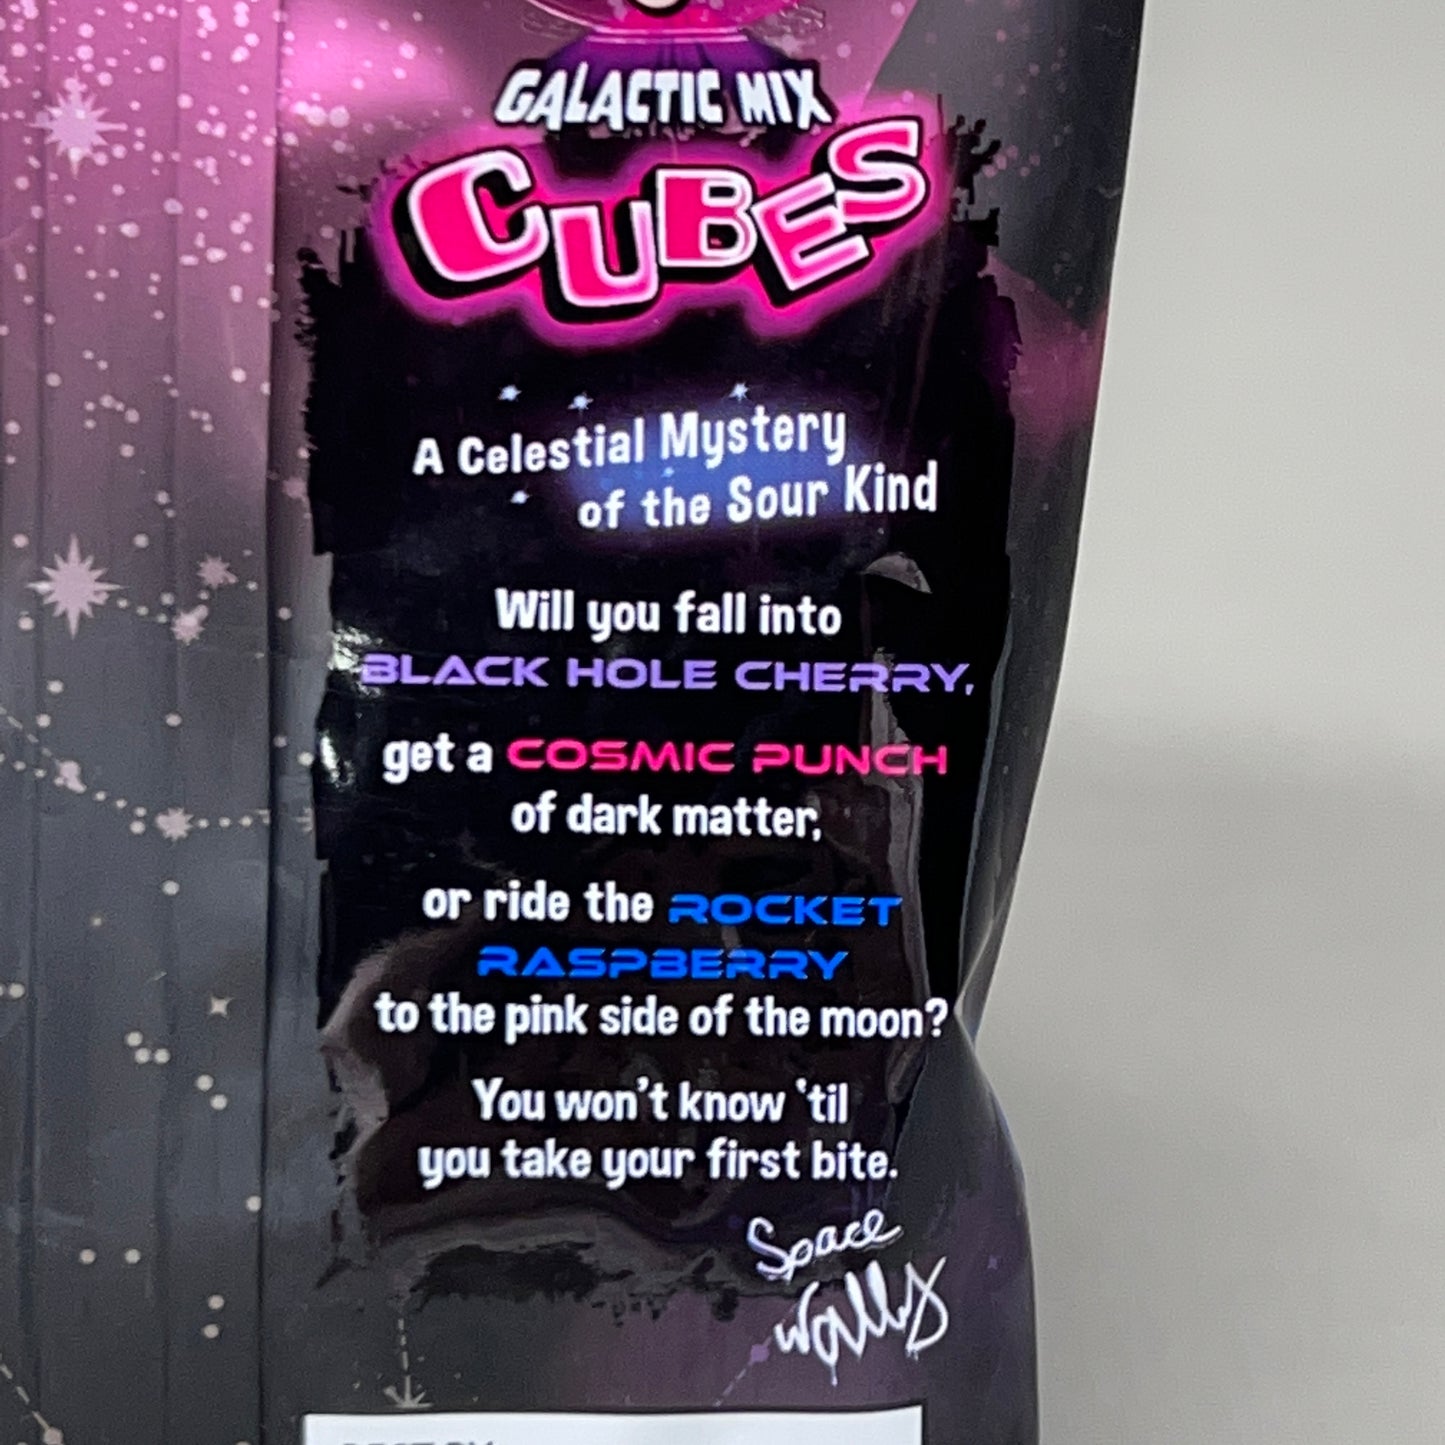 WARHEADS Galactic Mix Cubes 12-PACK Sour Chews 3 Flavors 4.5 oz 10/23 (New)